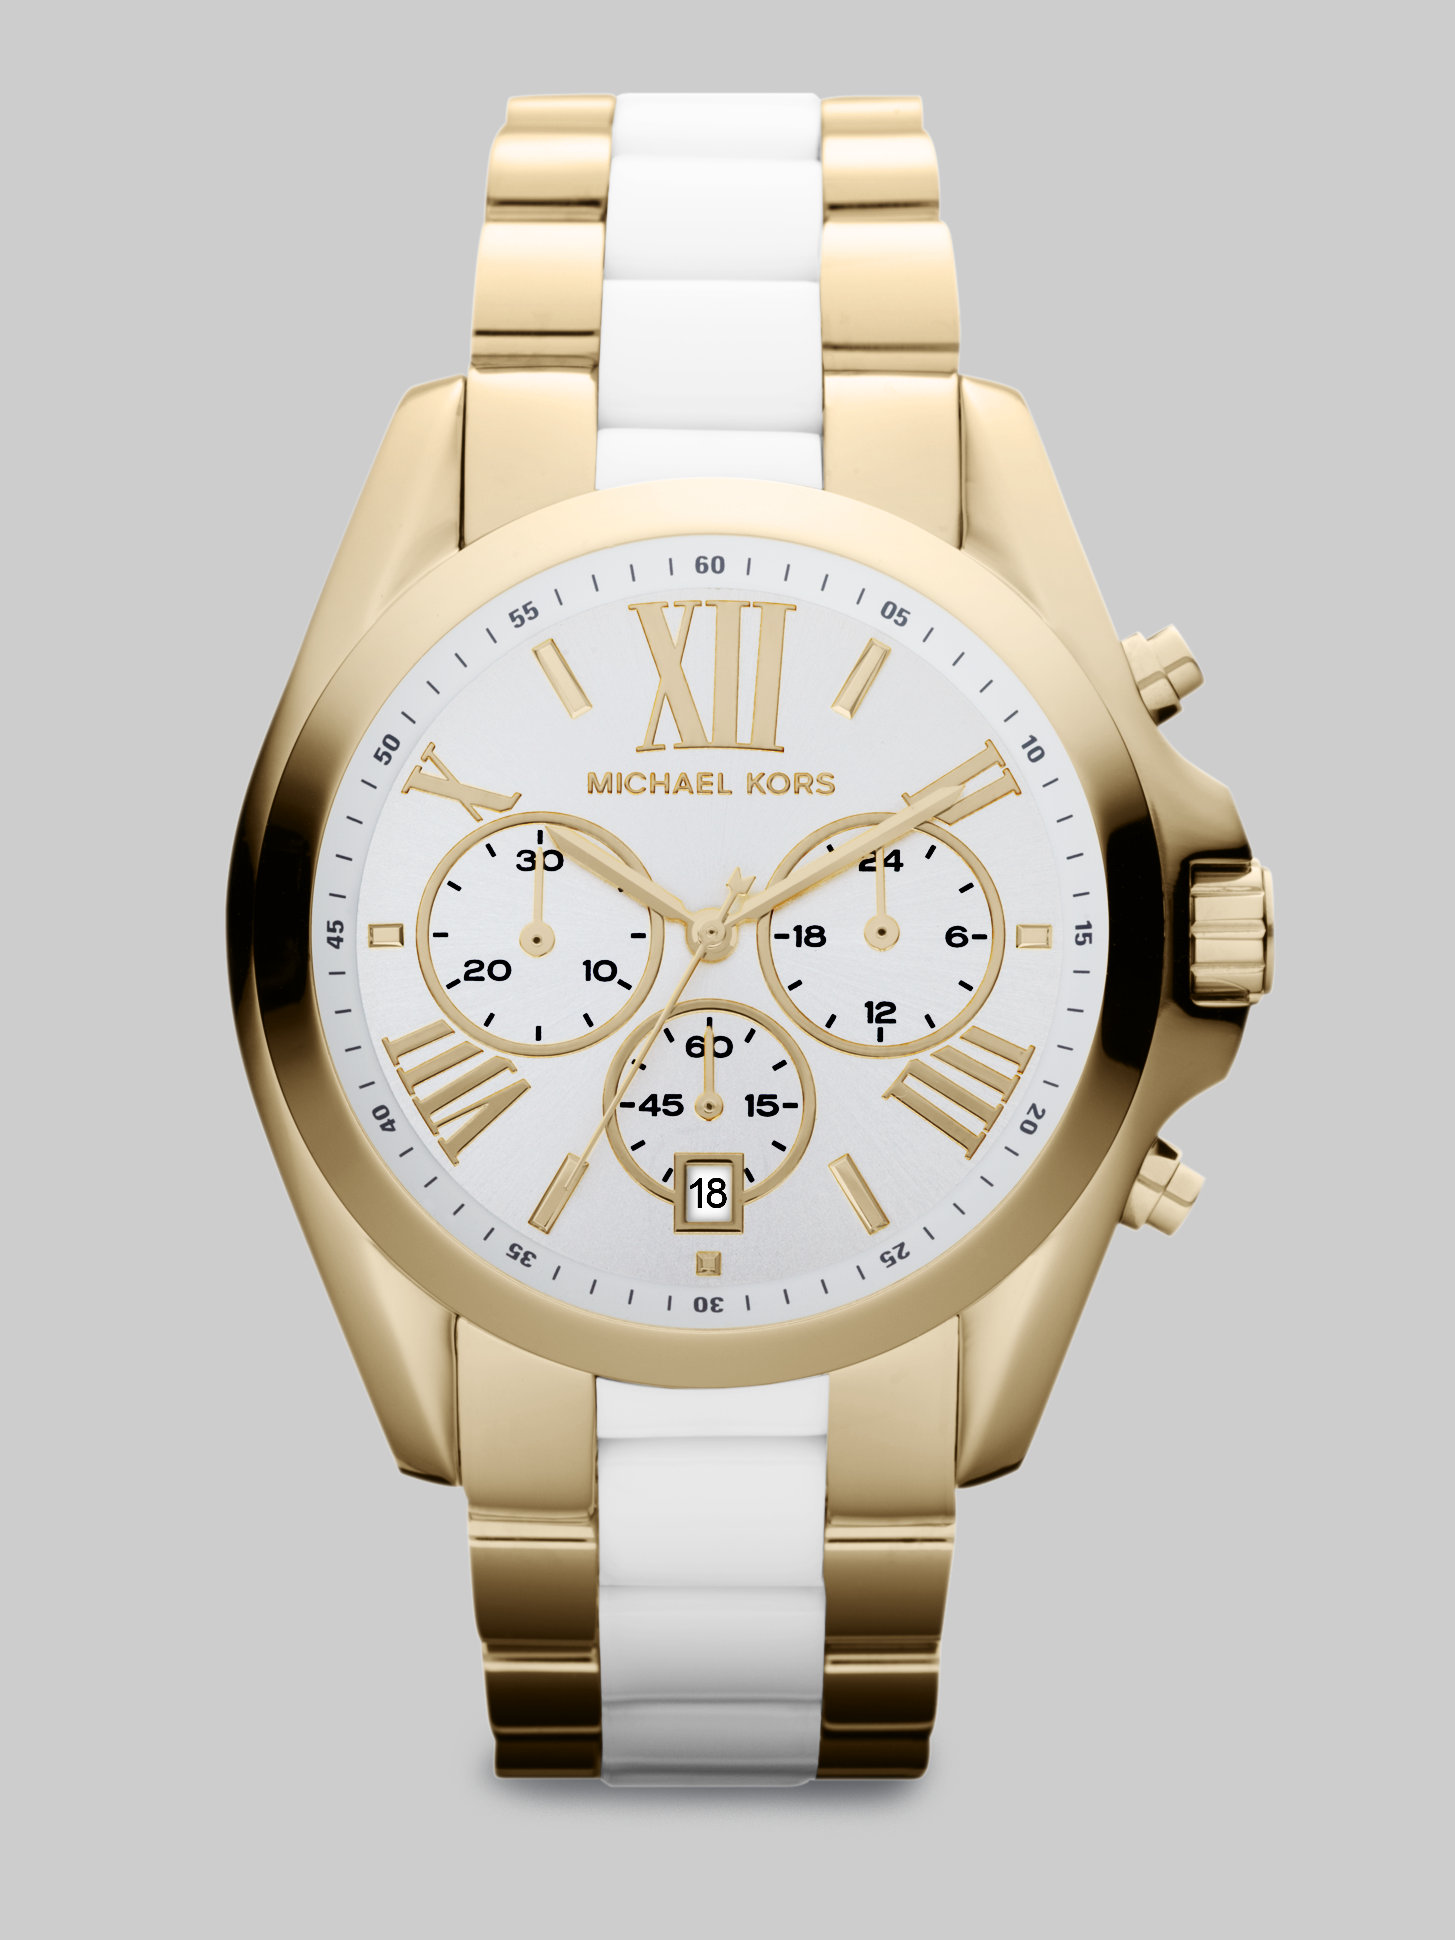 Michael kors Goldtone Stainless Steel Ceramic Chronograph Watch in